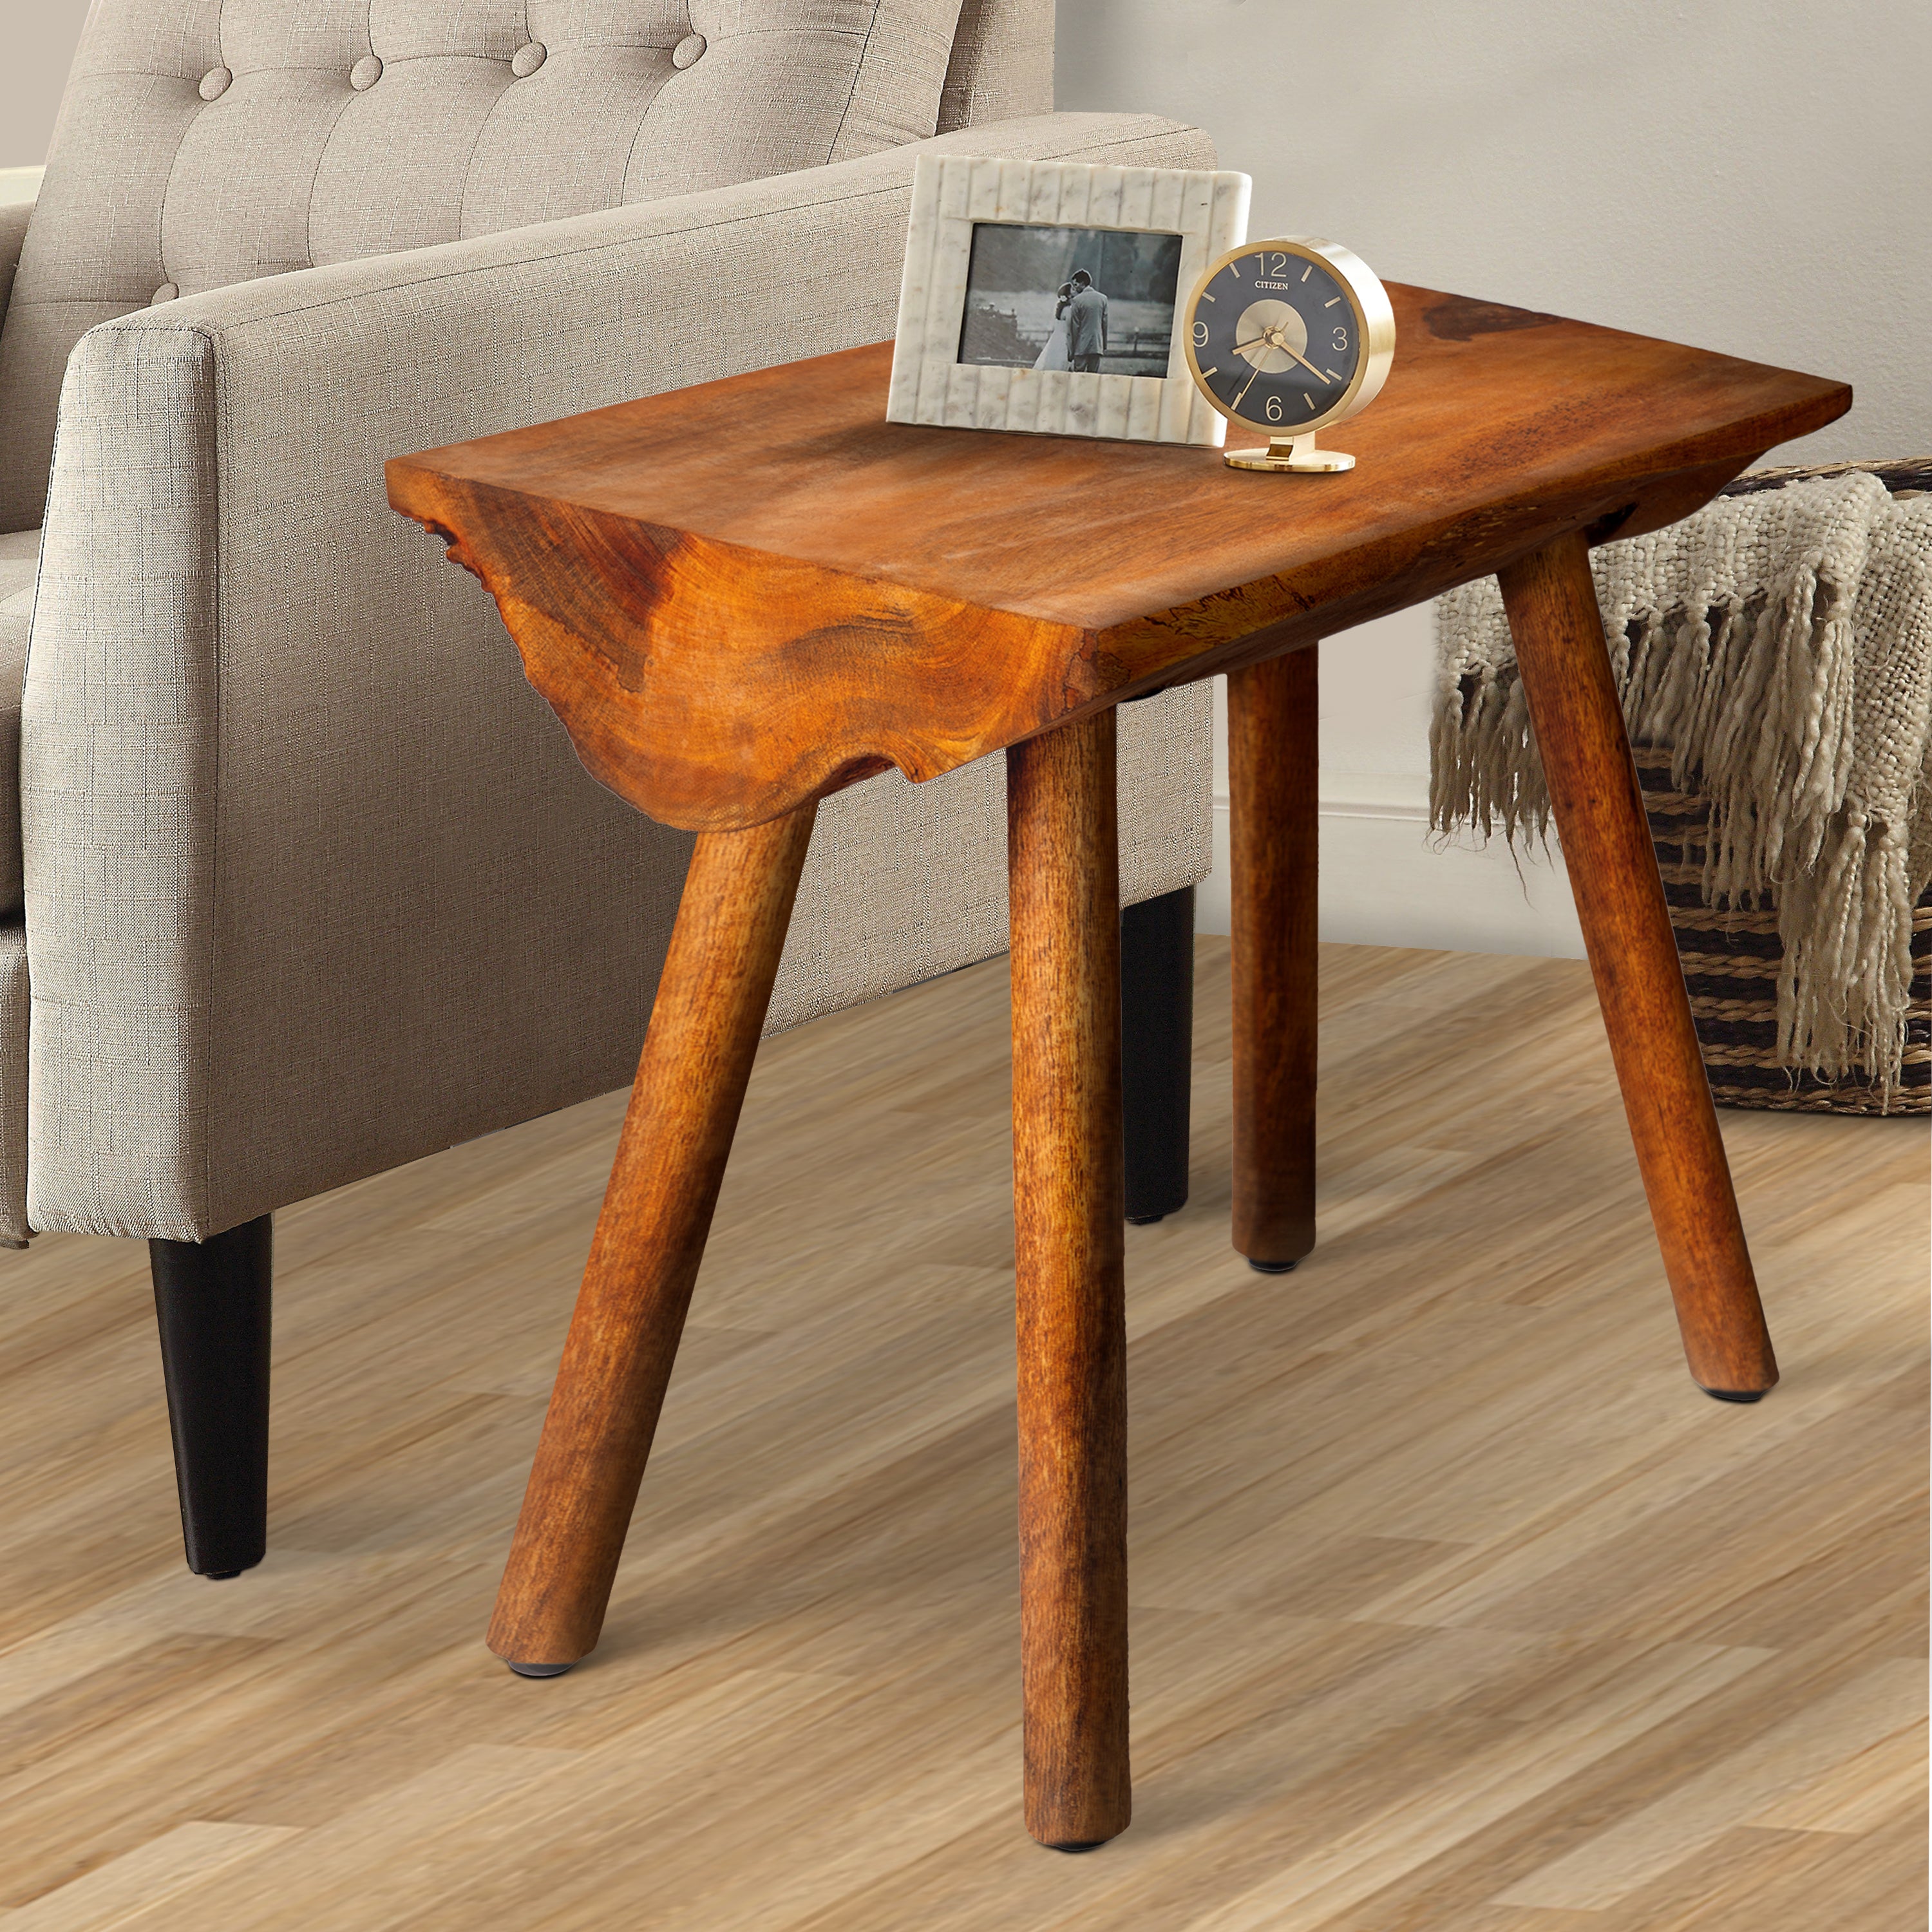 Small Side Tables Bedside End Tables Live Edge Rectangular Coffee Table